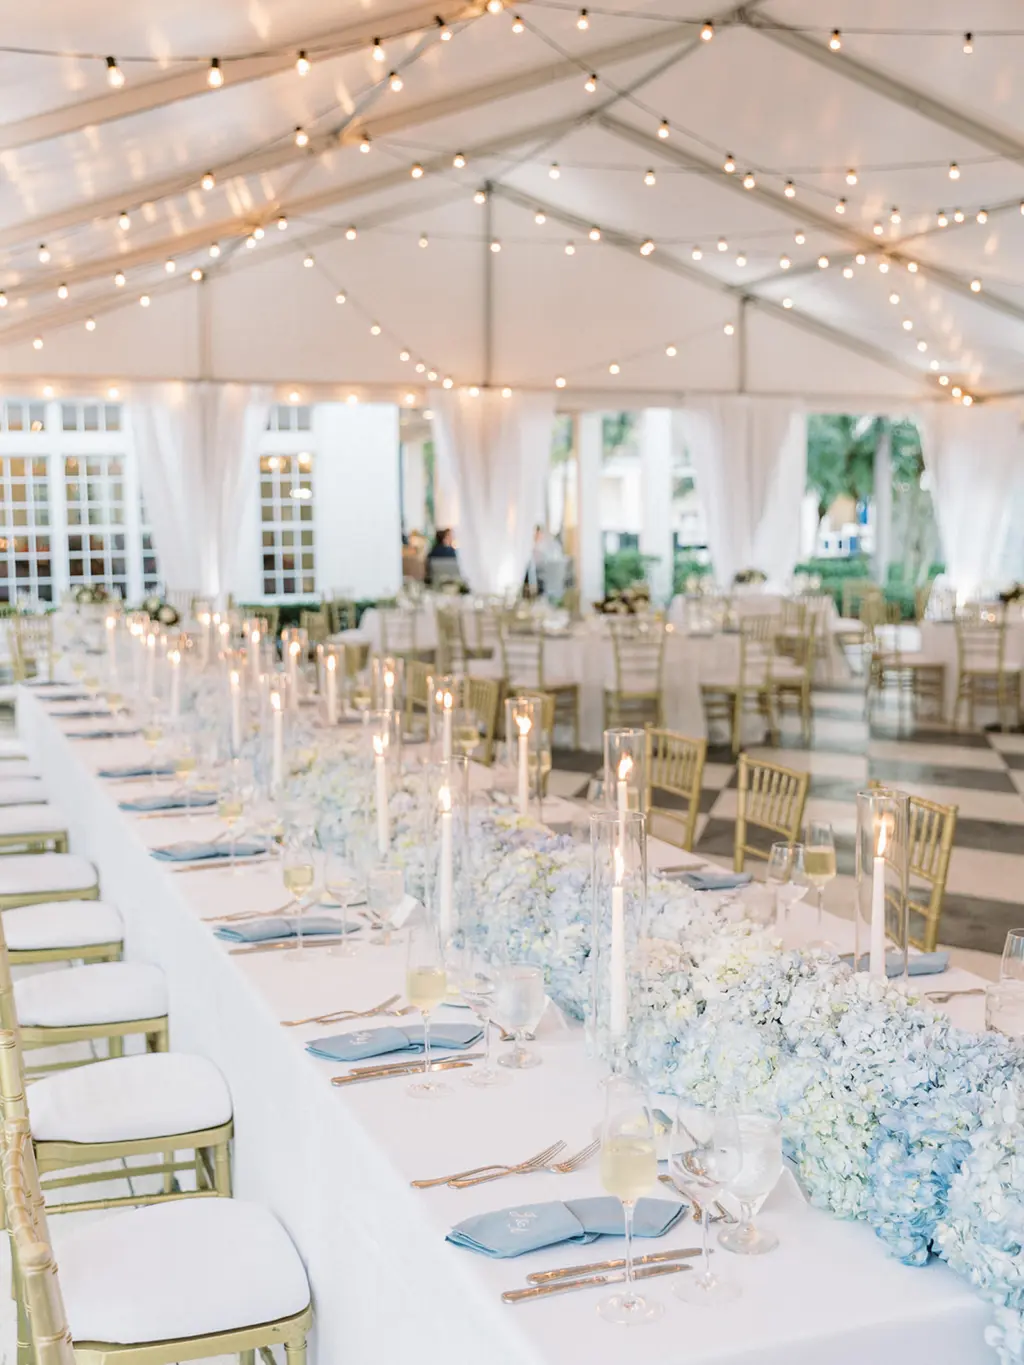 Classic Blue and White Hydrangea Garland Centerpiece with Taper Candles Inside Hurricane Glass Tube for Feasting Table | Classic Blue and White Tented Wedding Reception Inspiration | Tampa Bay Florist Save The Date Florida | Planner EventFull Weddings